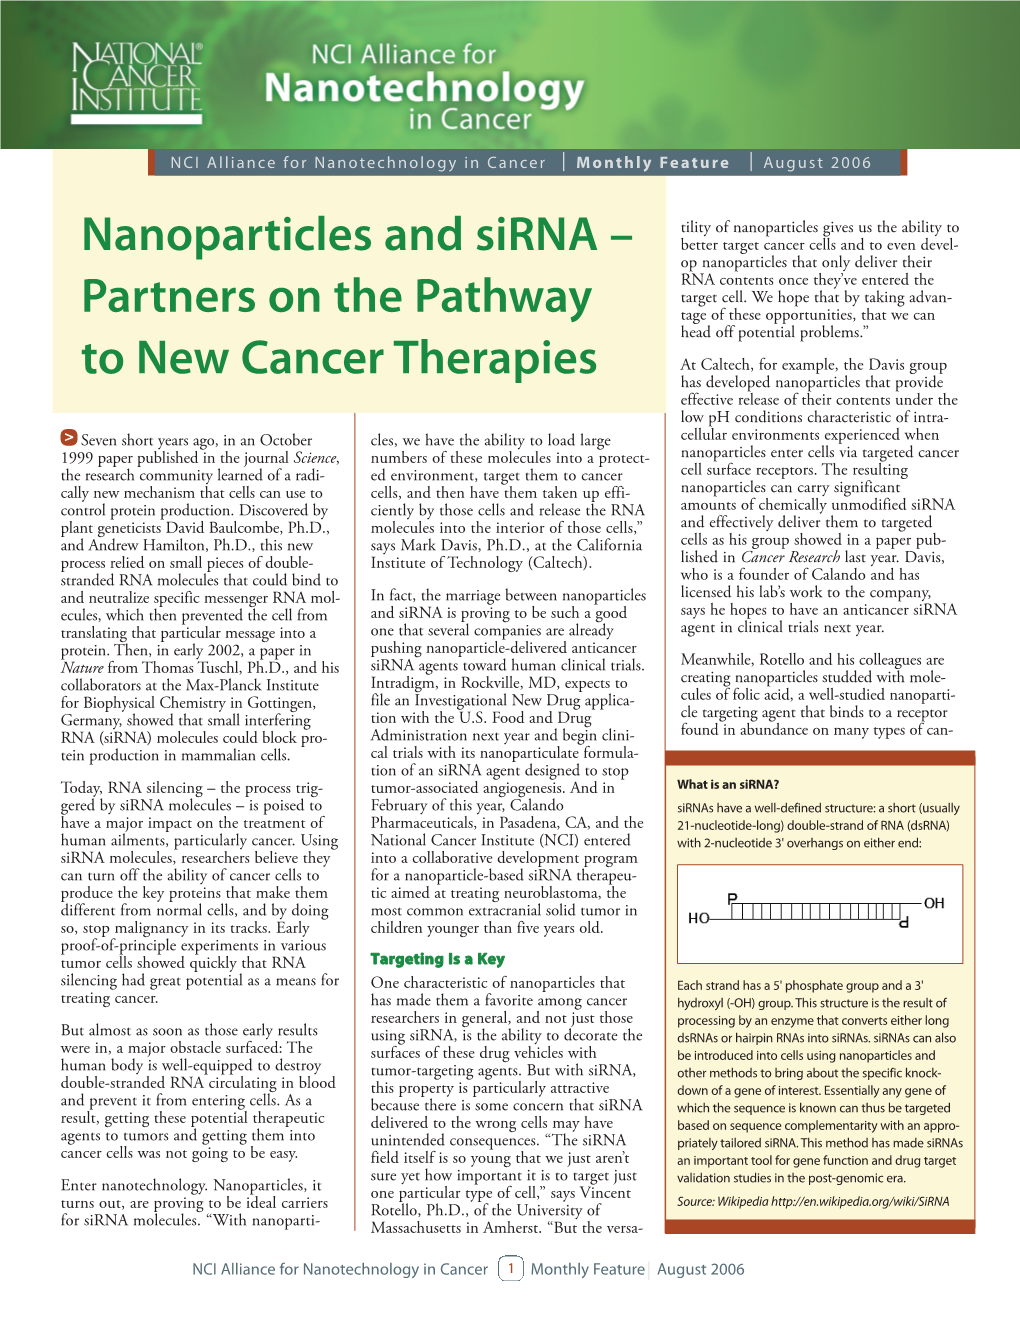 Nanoparticles and Sirna – Partners on the Pathway to New Cancer